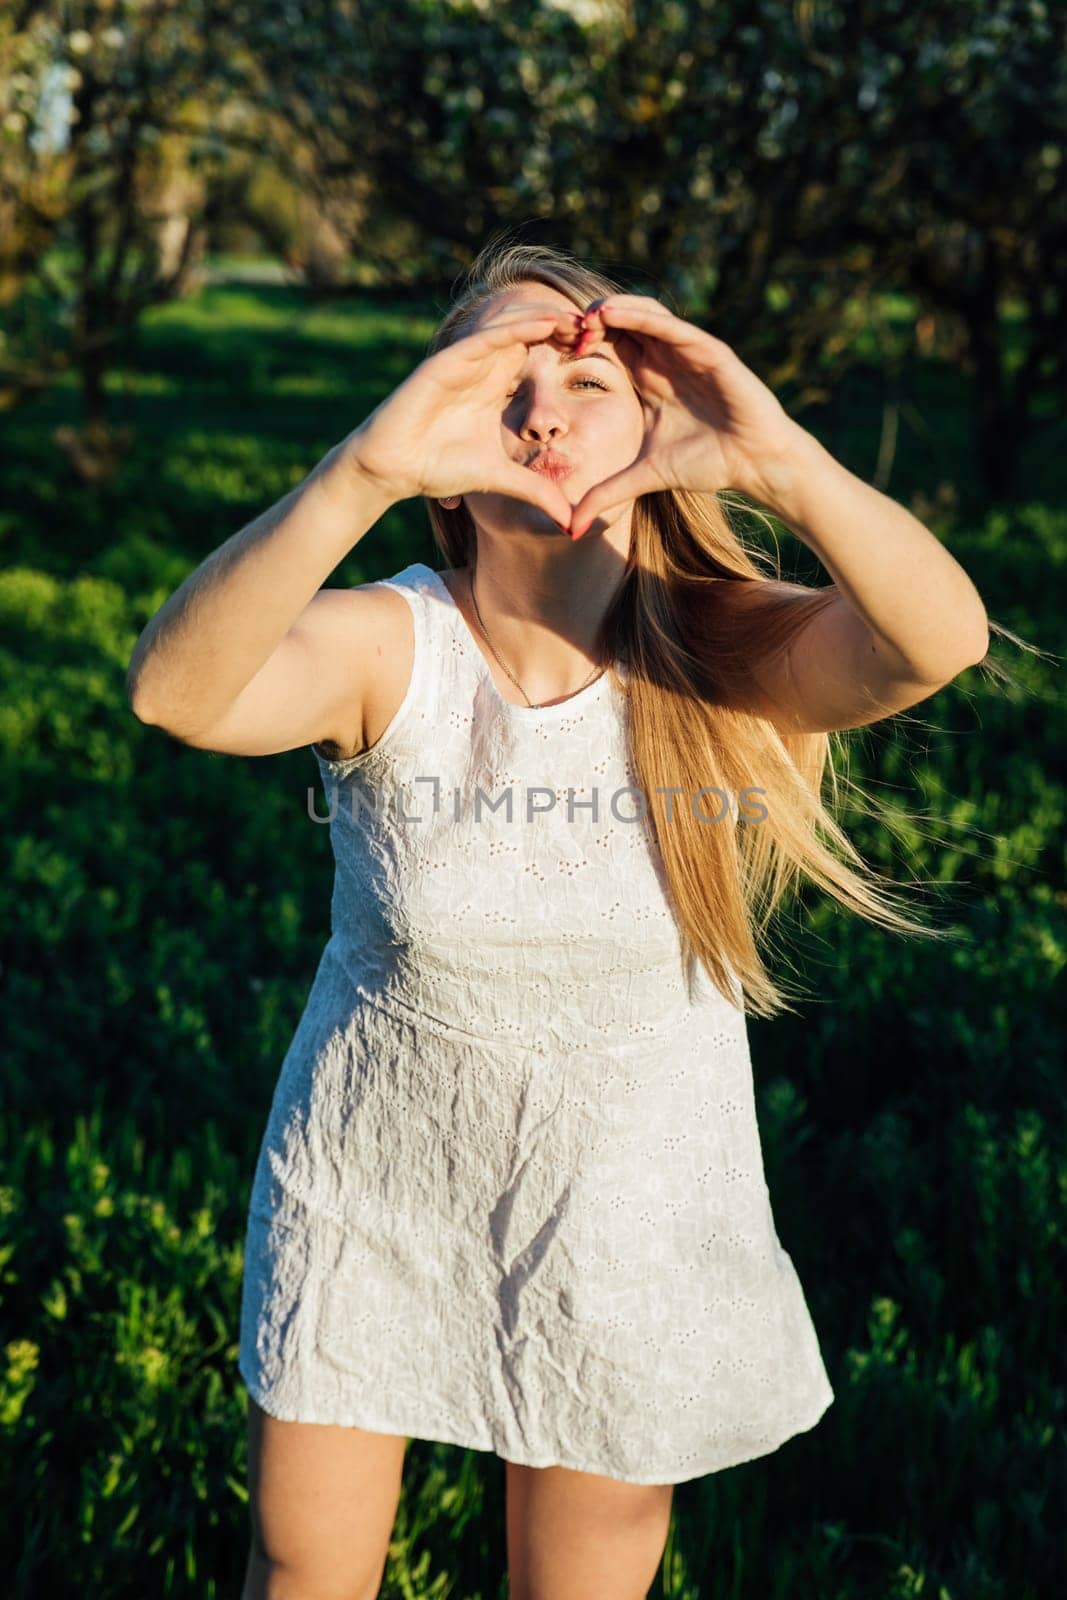 woman shows heart in park walk nature